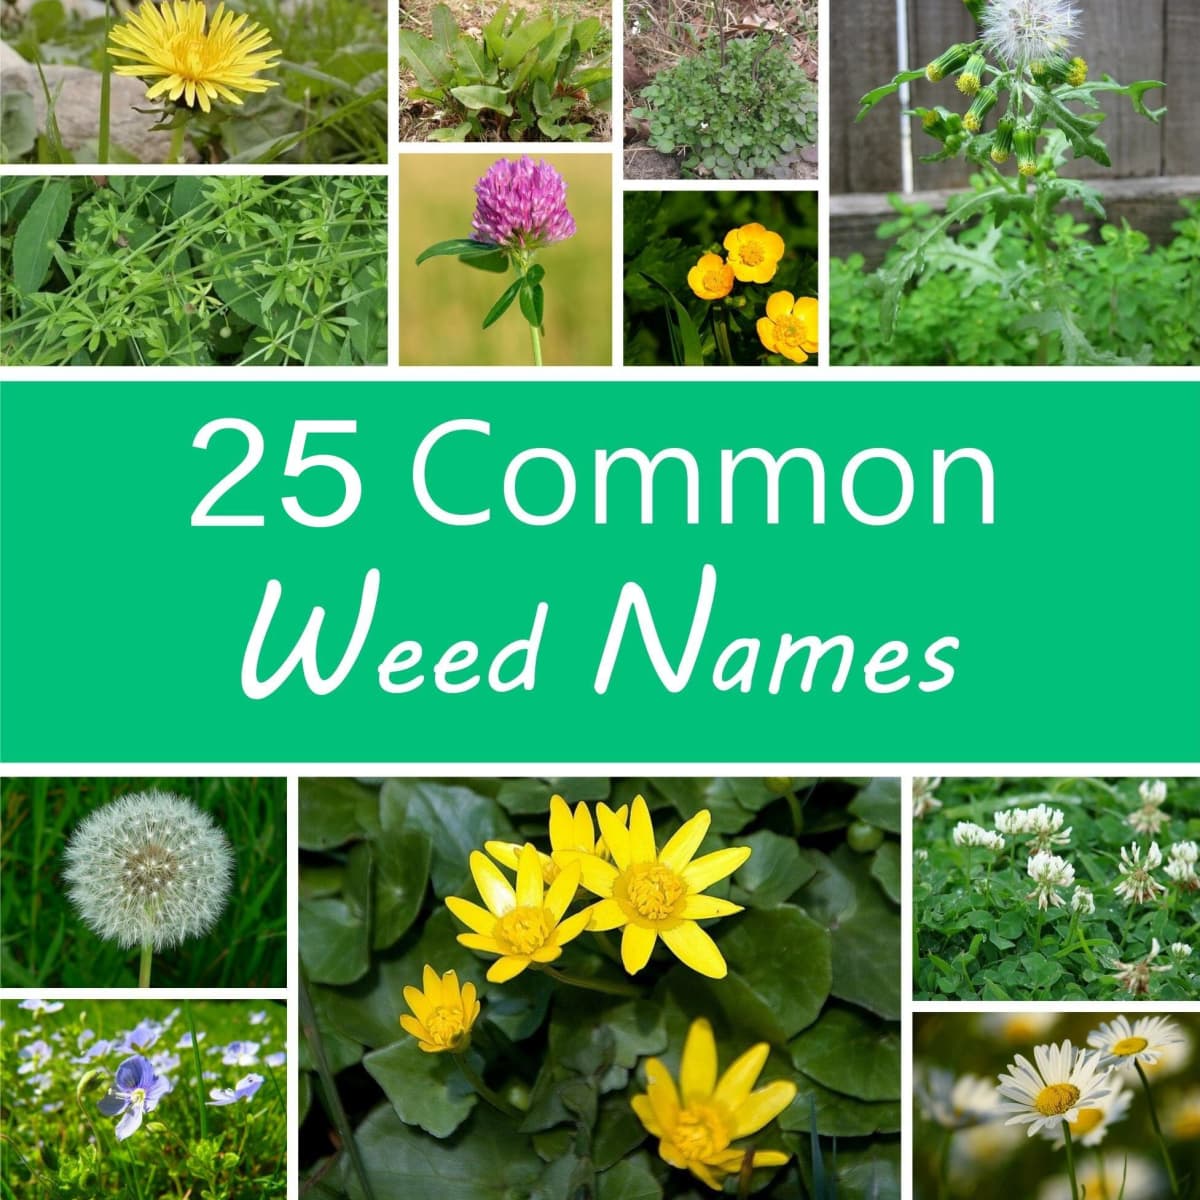 A Guide to Names of Weeds (With Pictures) - Dengarden